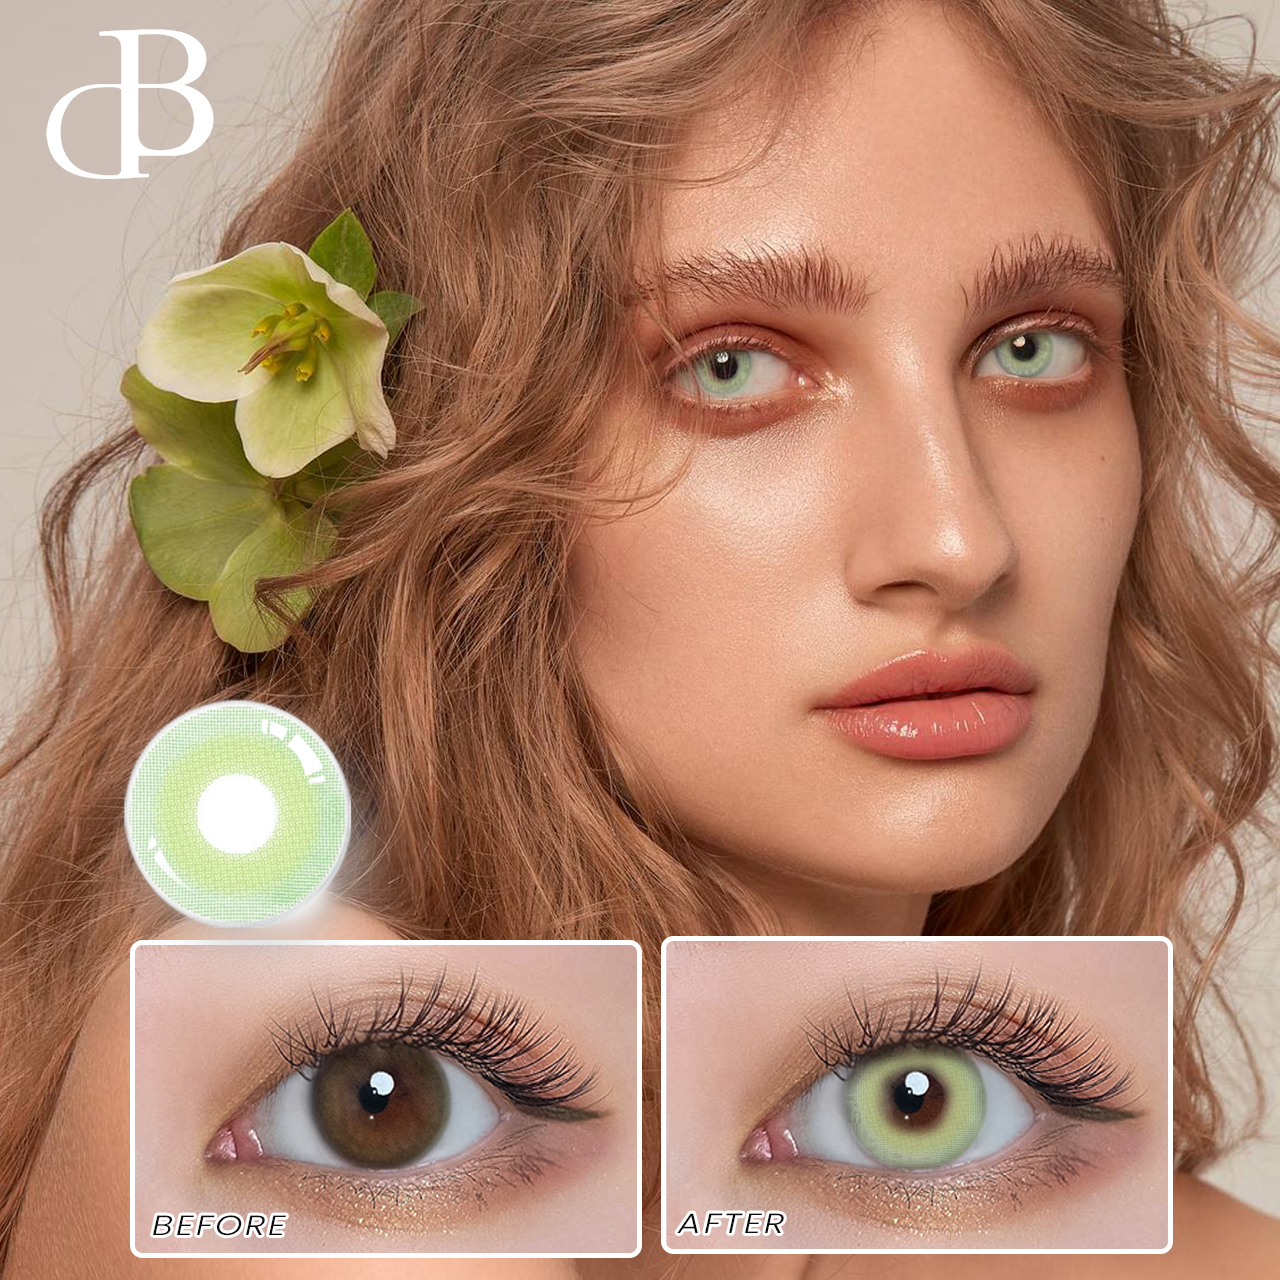 Free Shipping DBeyes Colored Lenses Contacts Eye Makeup Cosmetics Contacted Lens for Cosplay Beauty Color Contact Lenses Featured Image